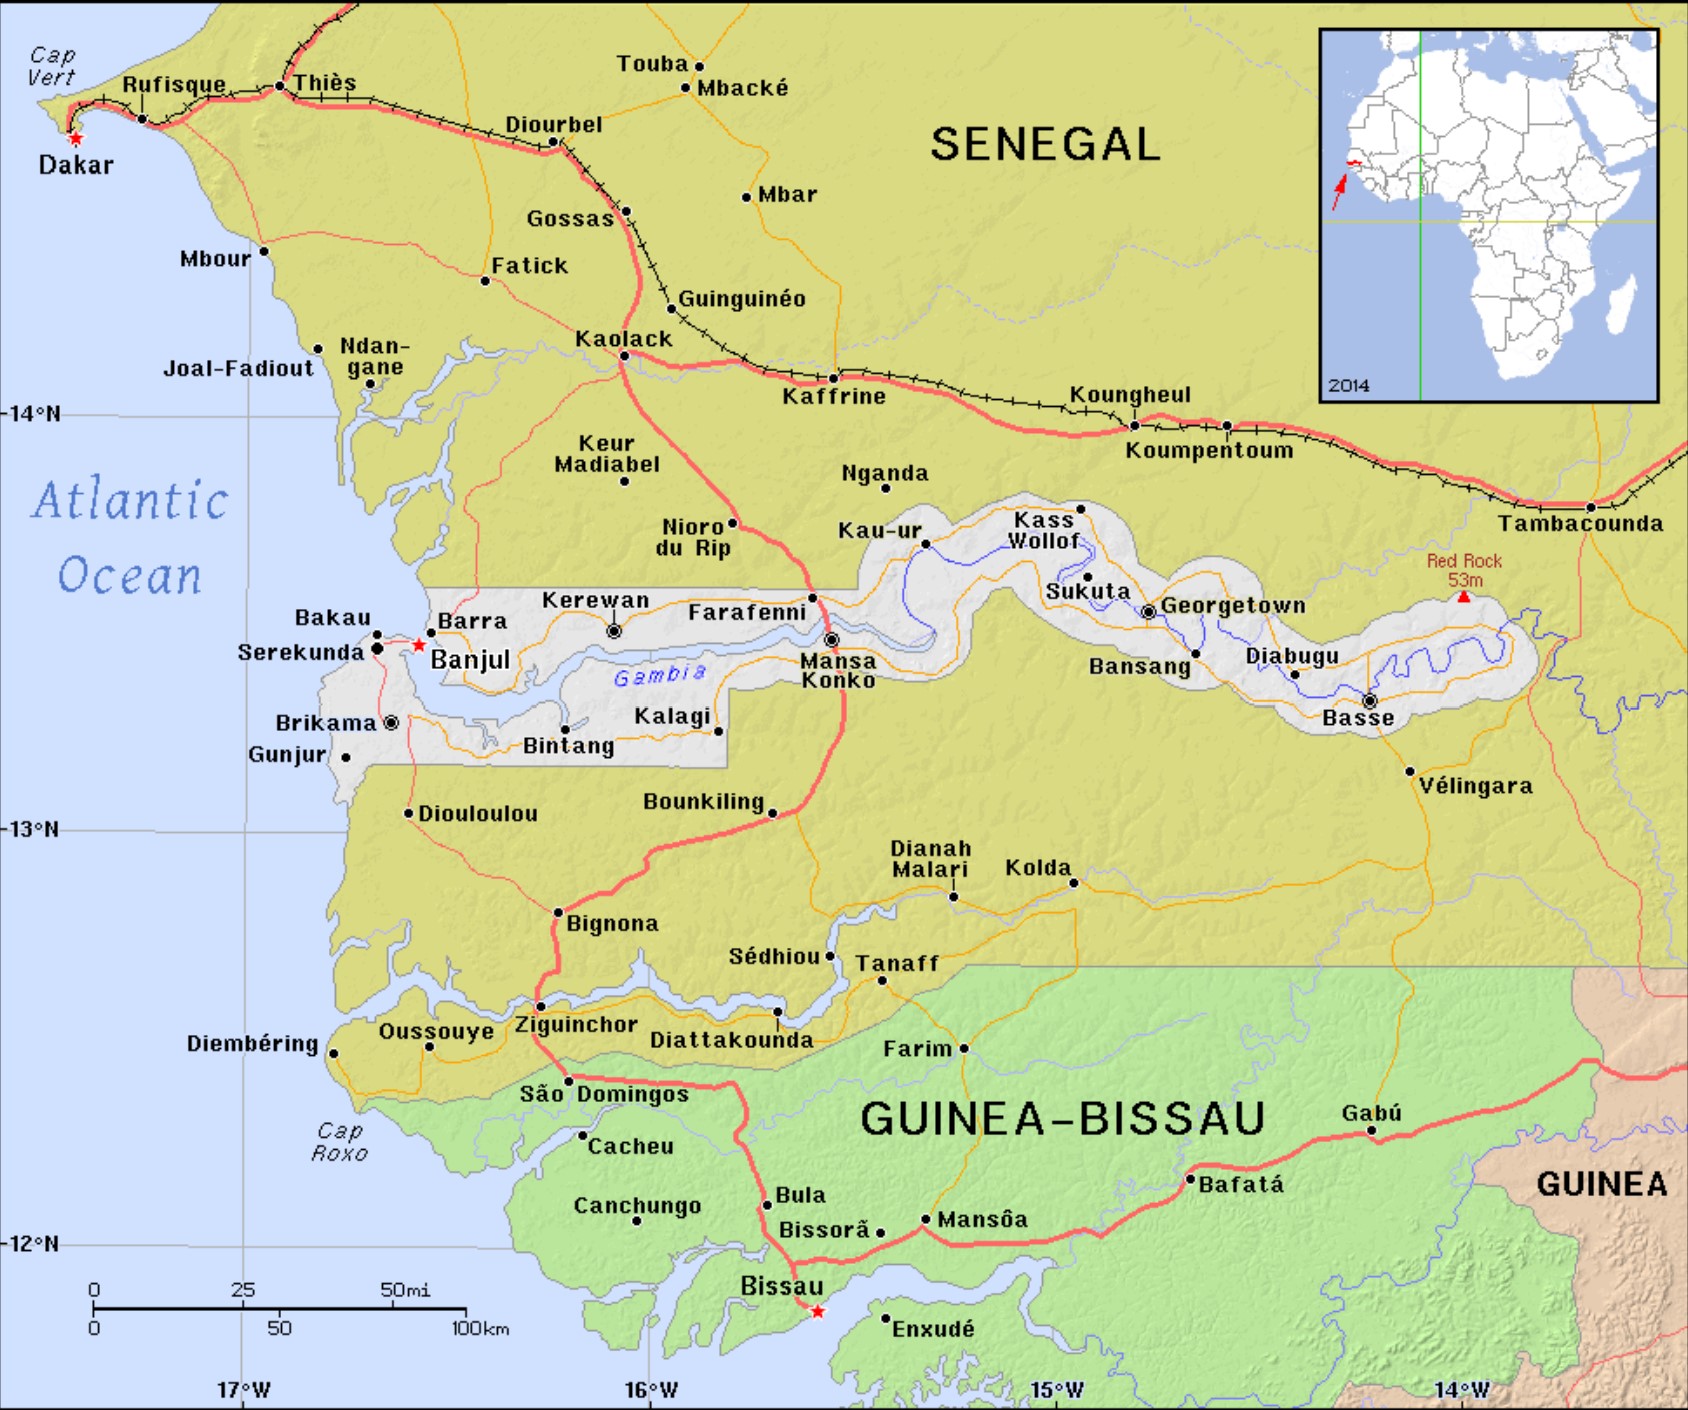 A map of Gambia and Senegal